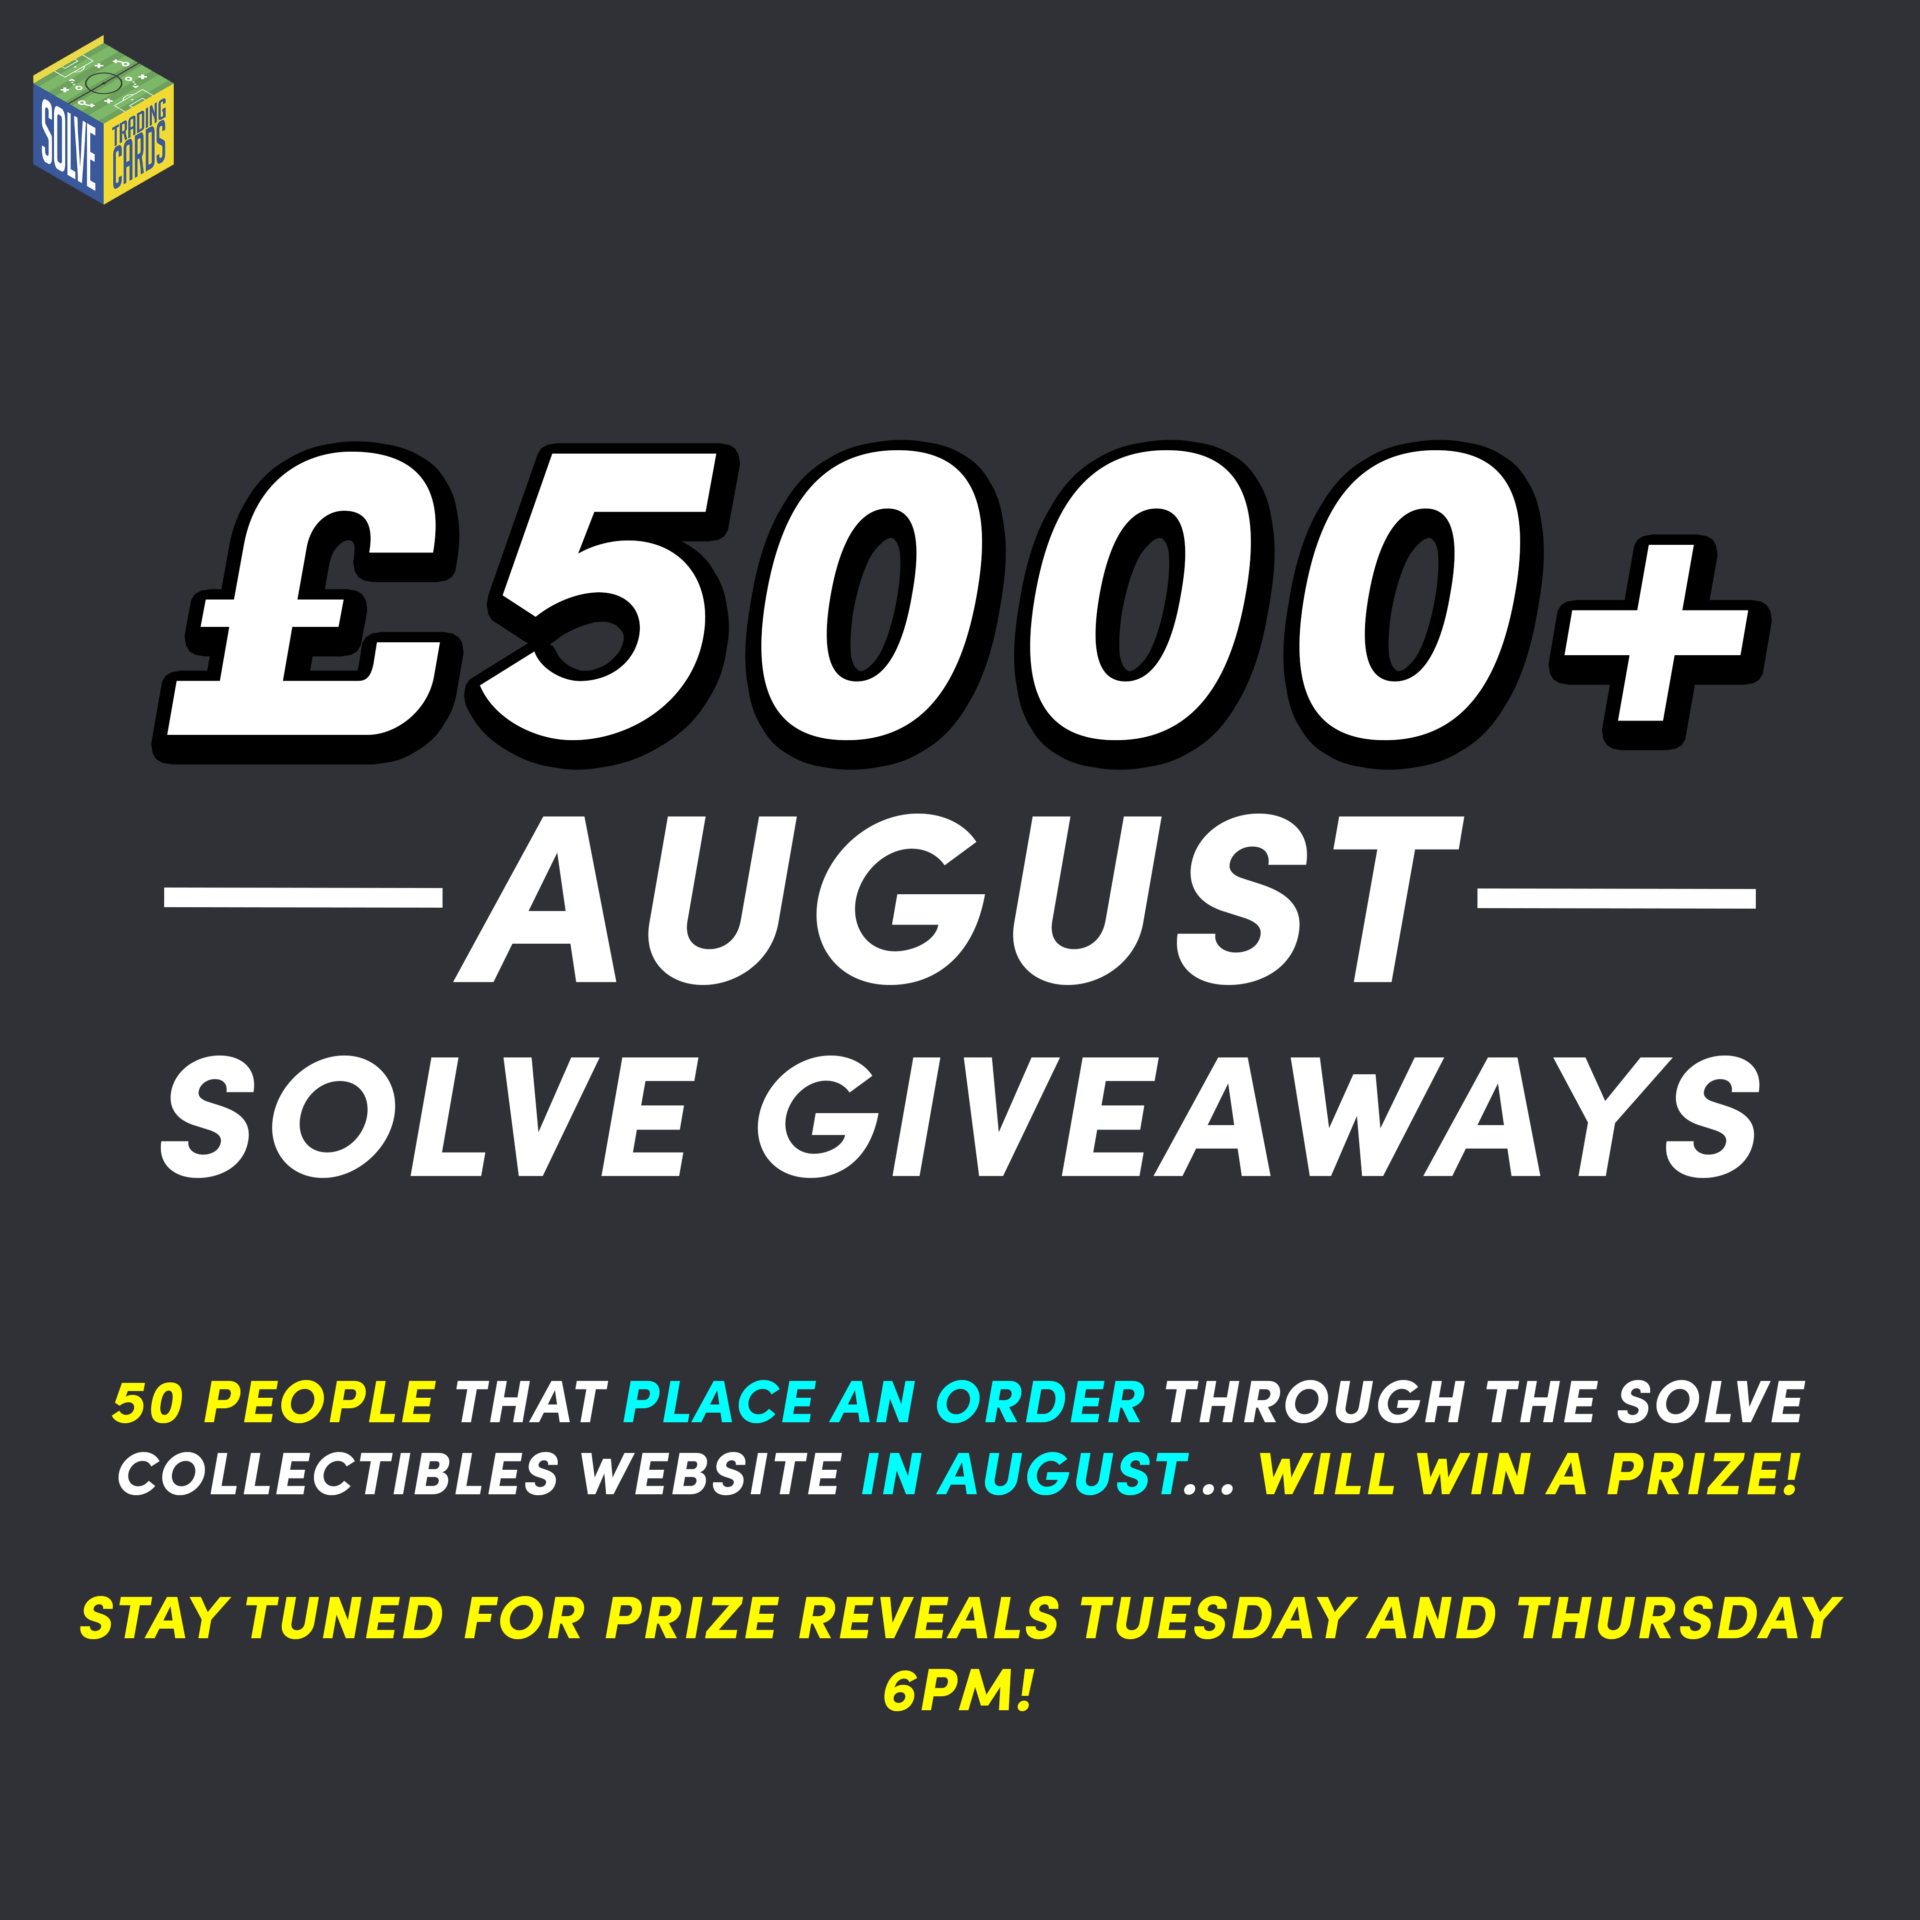 Over £5000 in prizes to be given away to customers who place an order in August! image